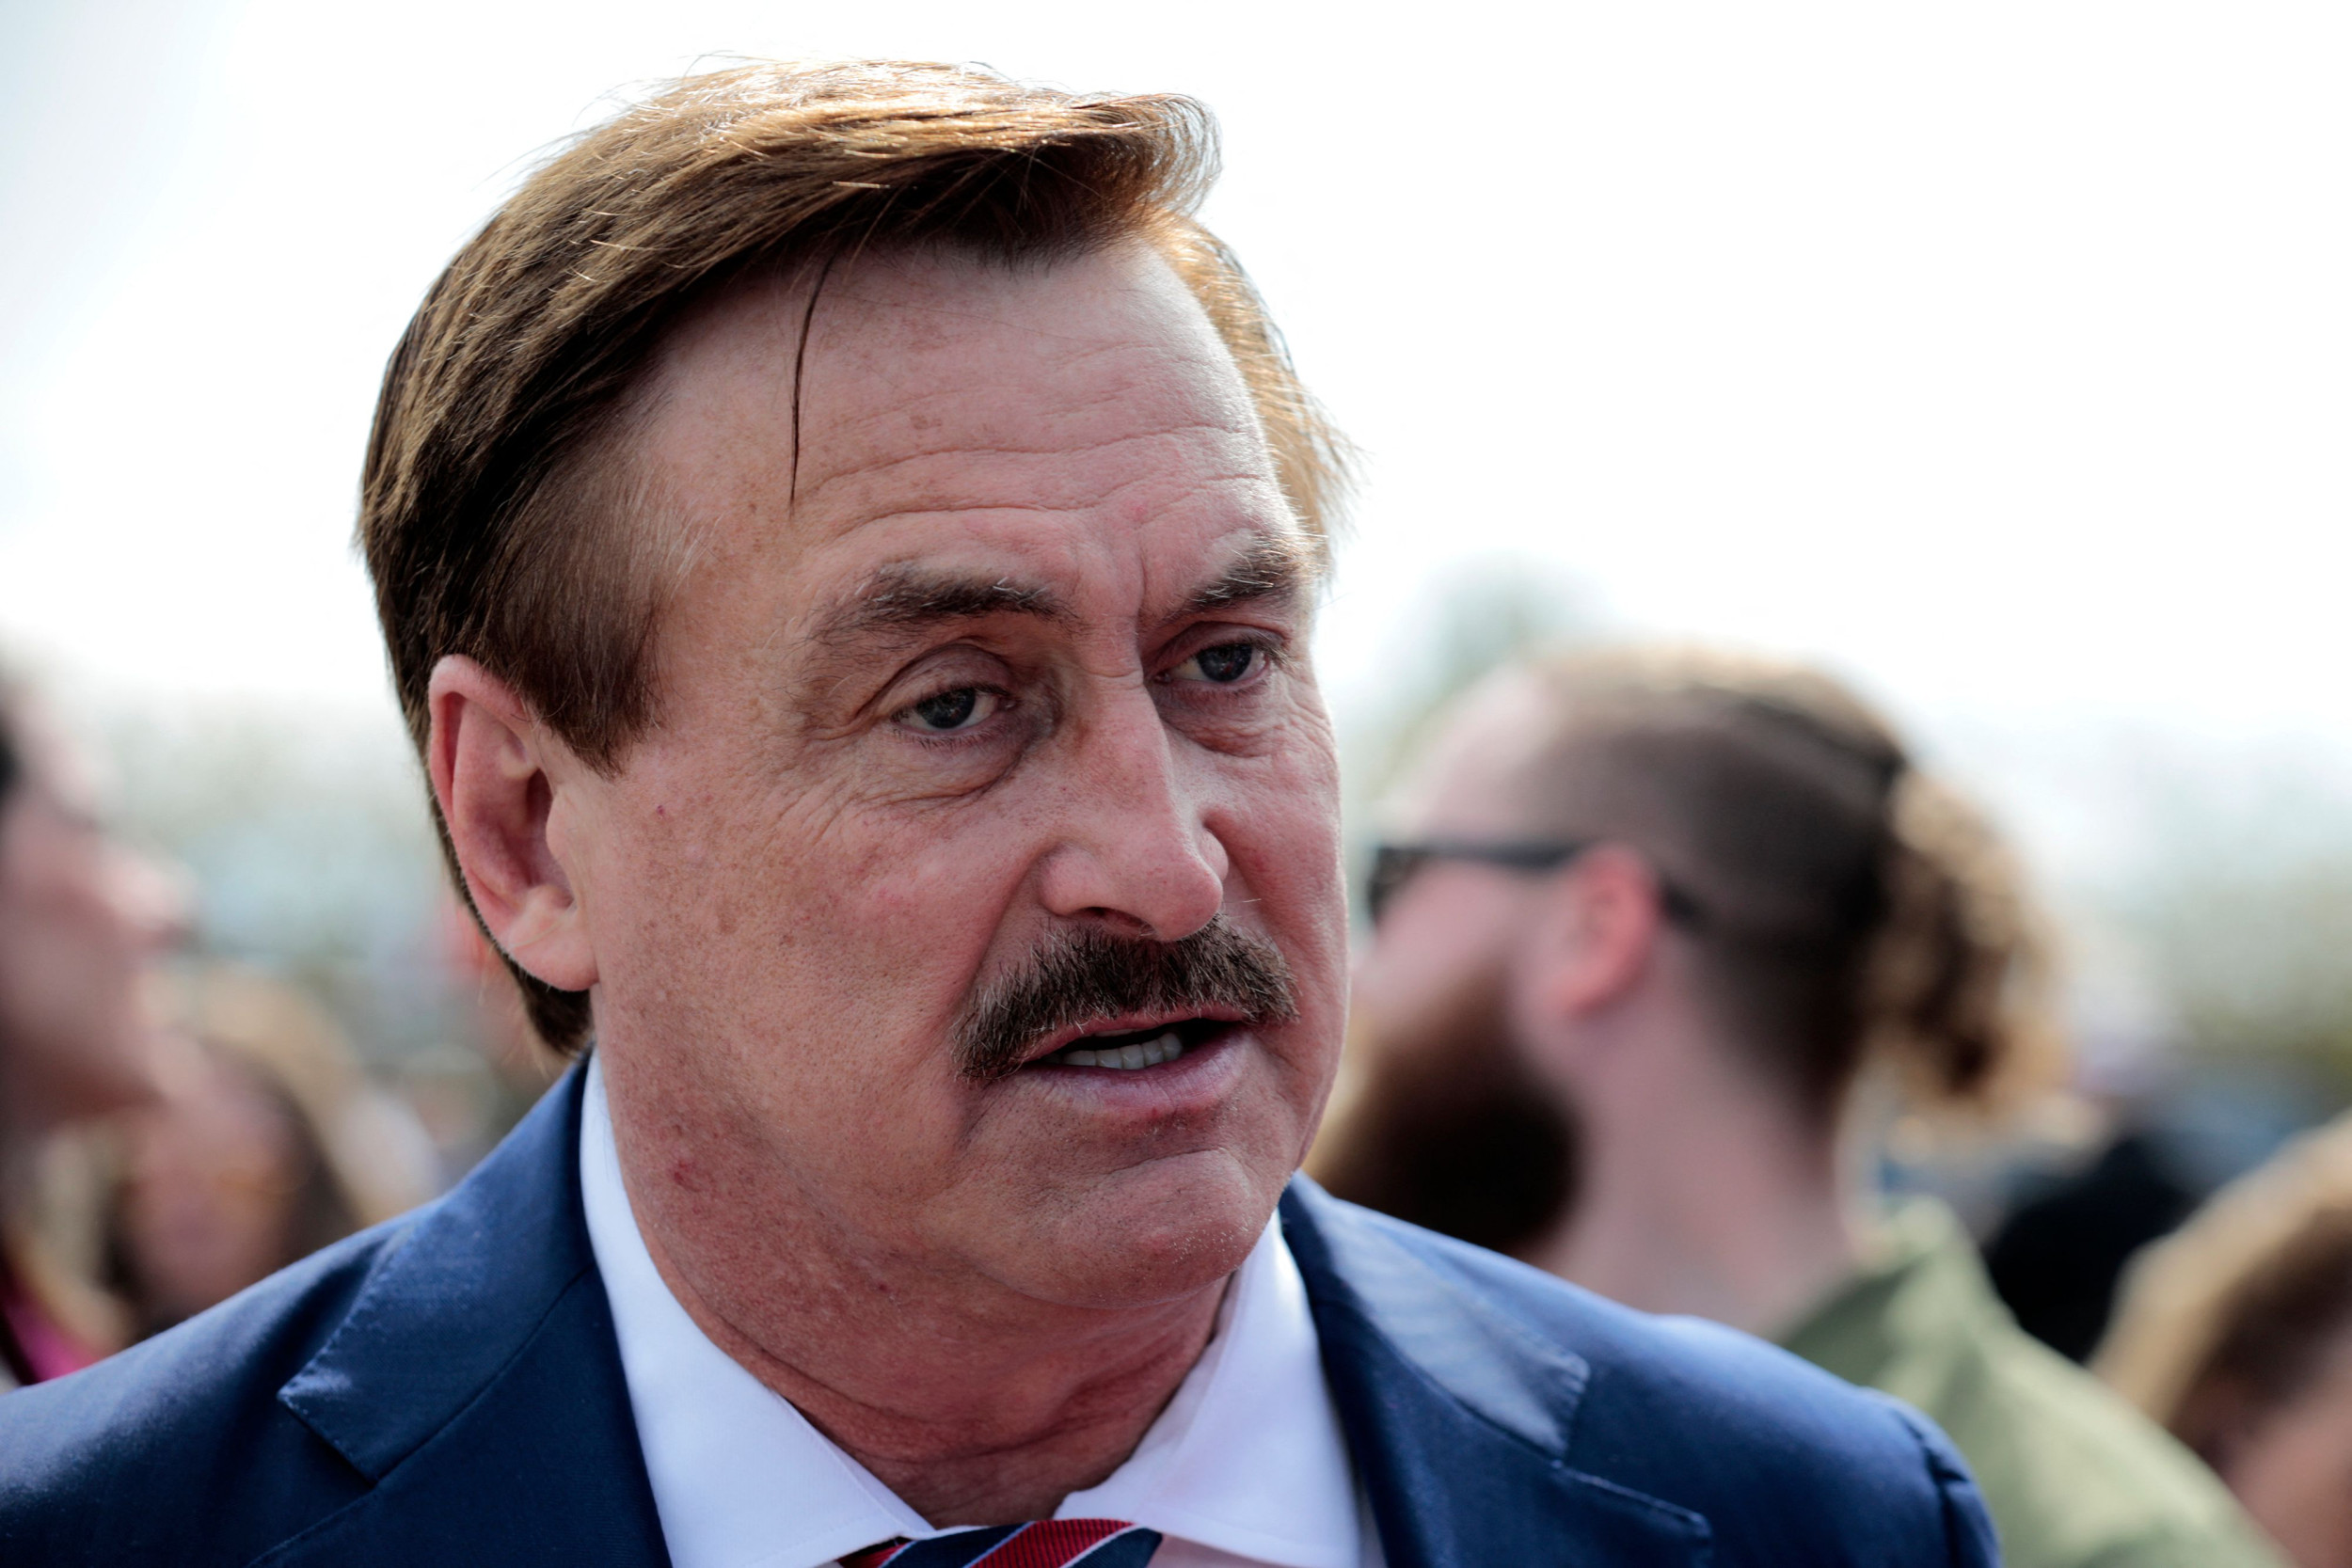 mypillow-ceo-mike-lindell.jpg